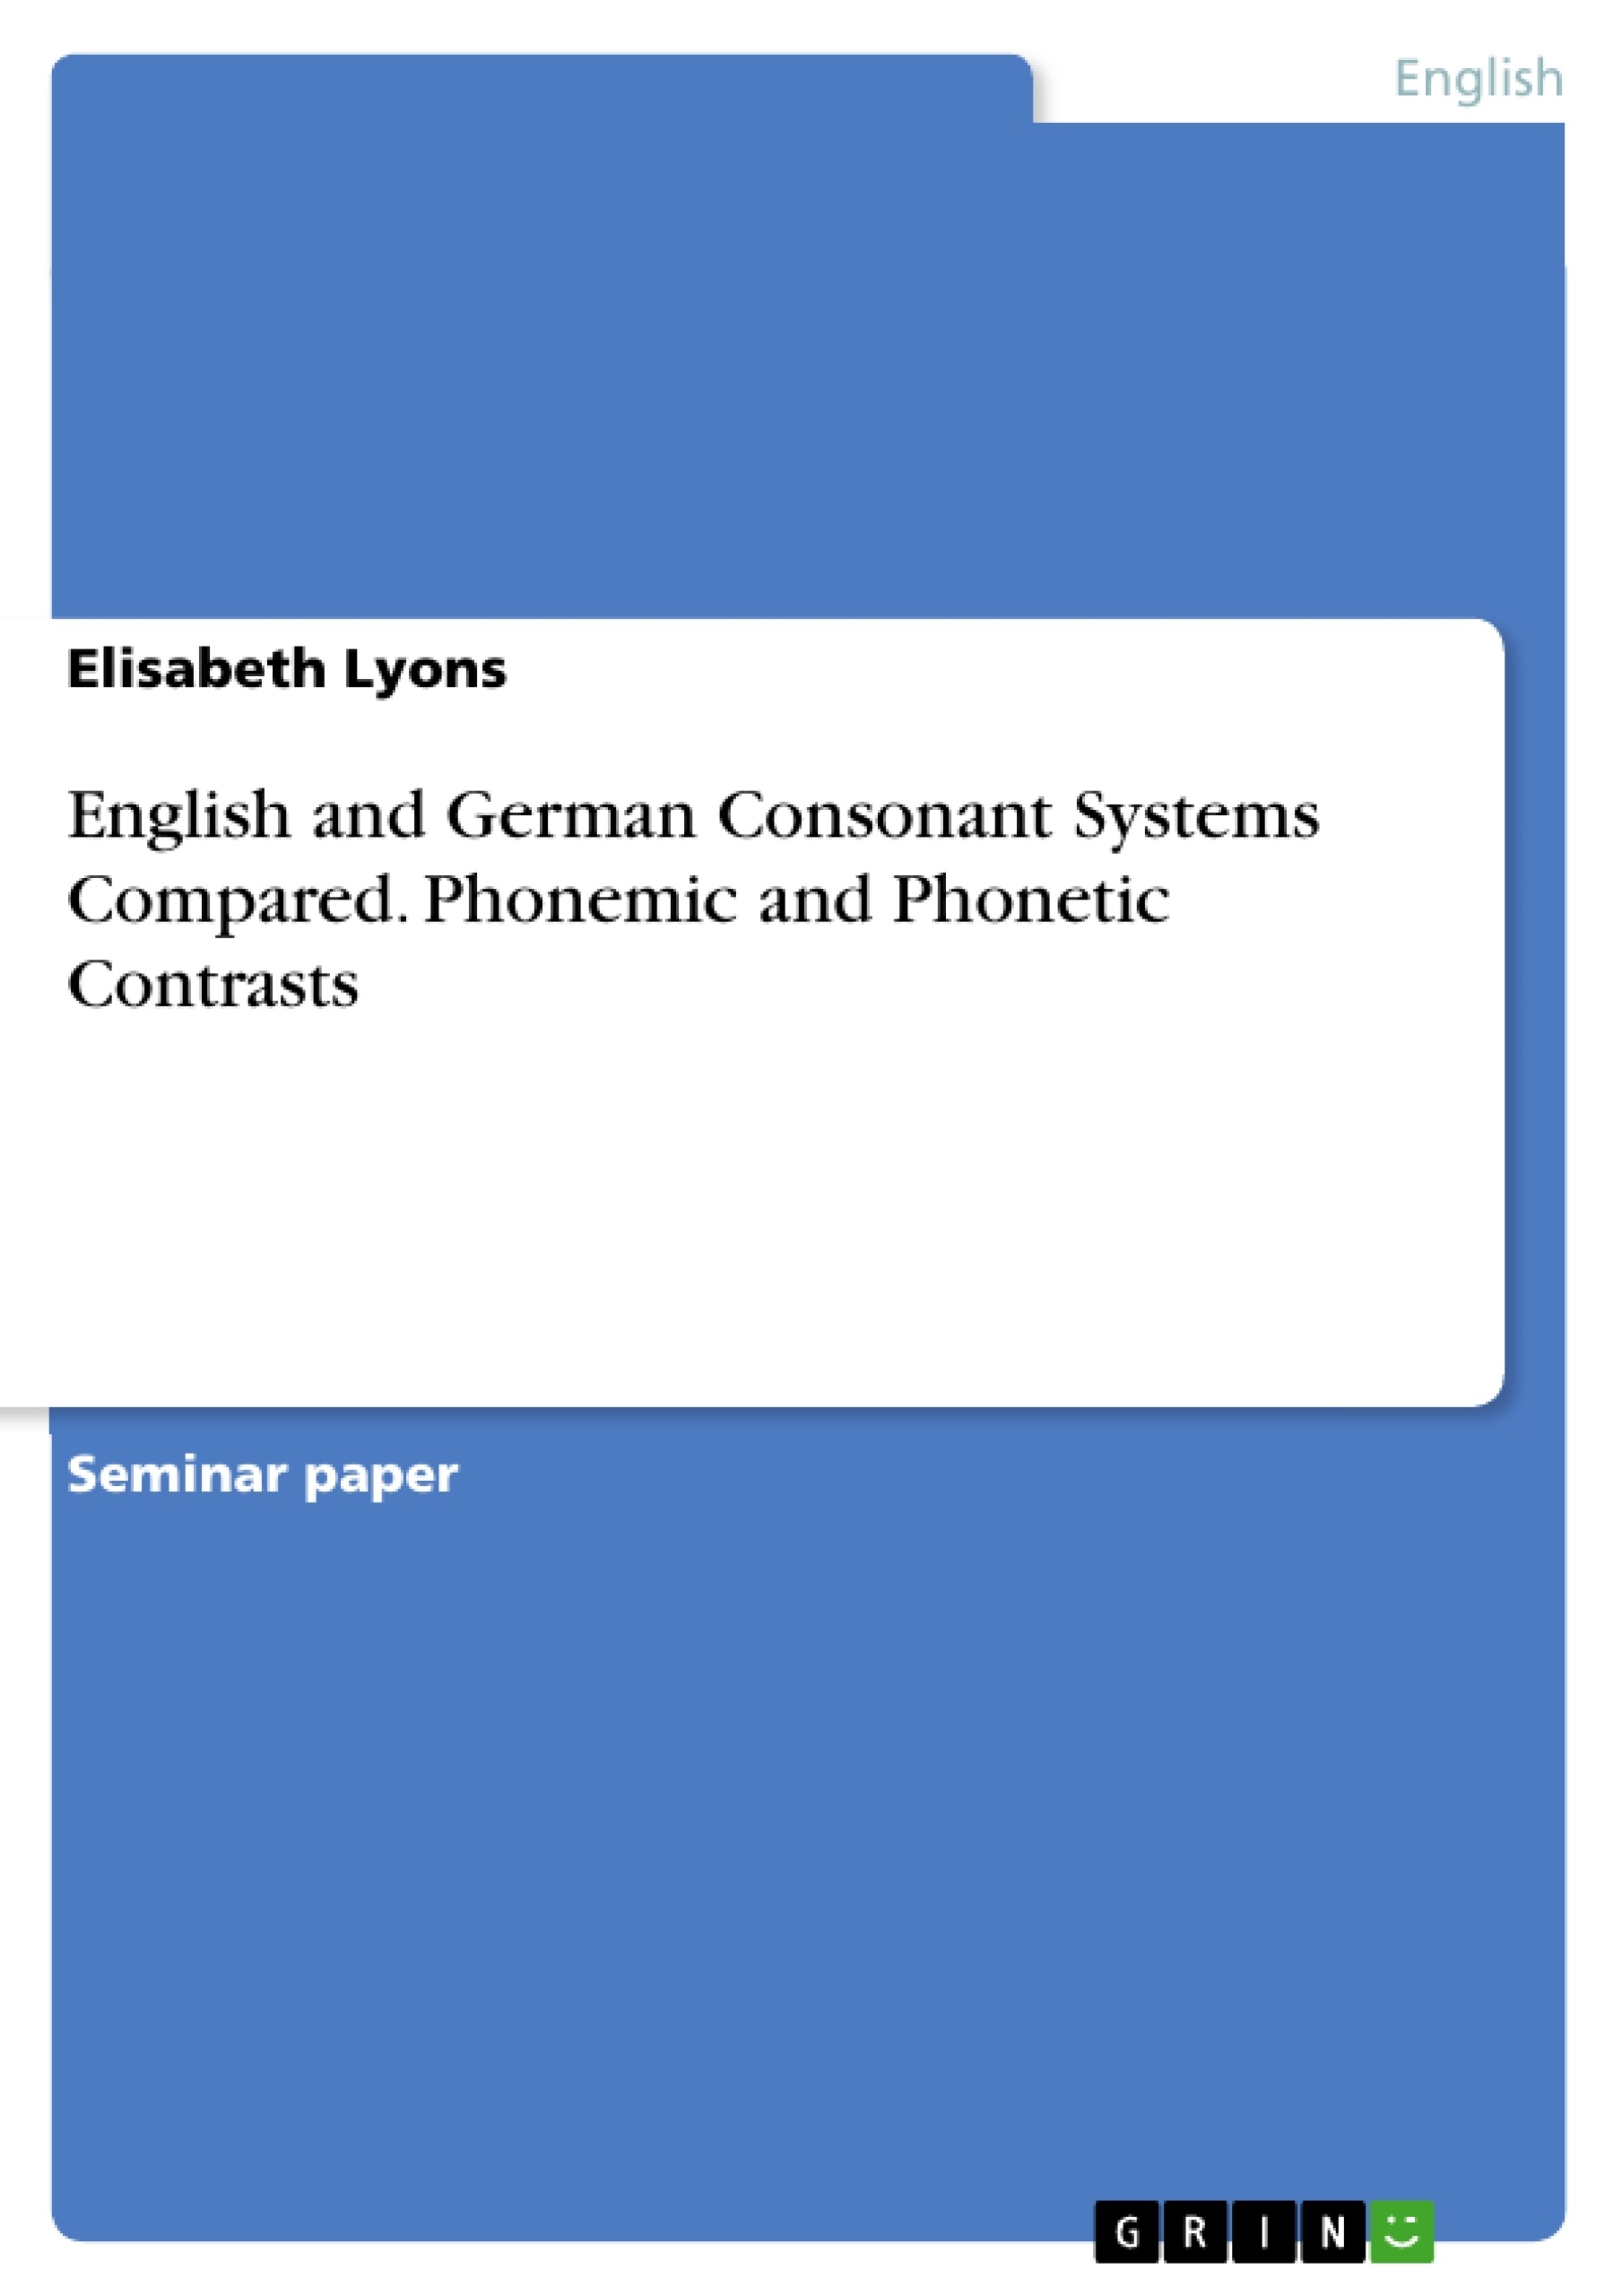 Title: English and German Consonant Systems Compared. Phonemic and Phonetic Contrasts